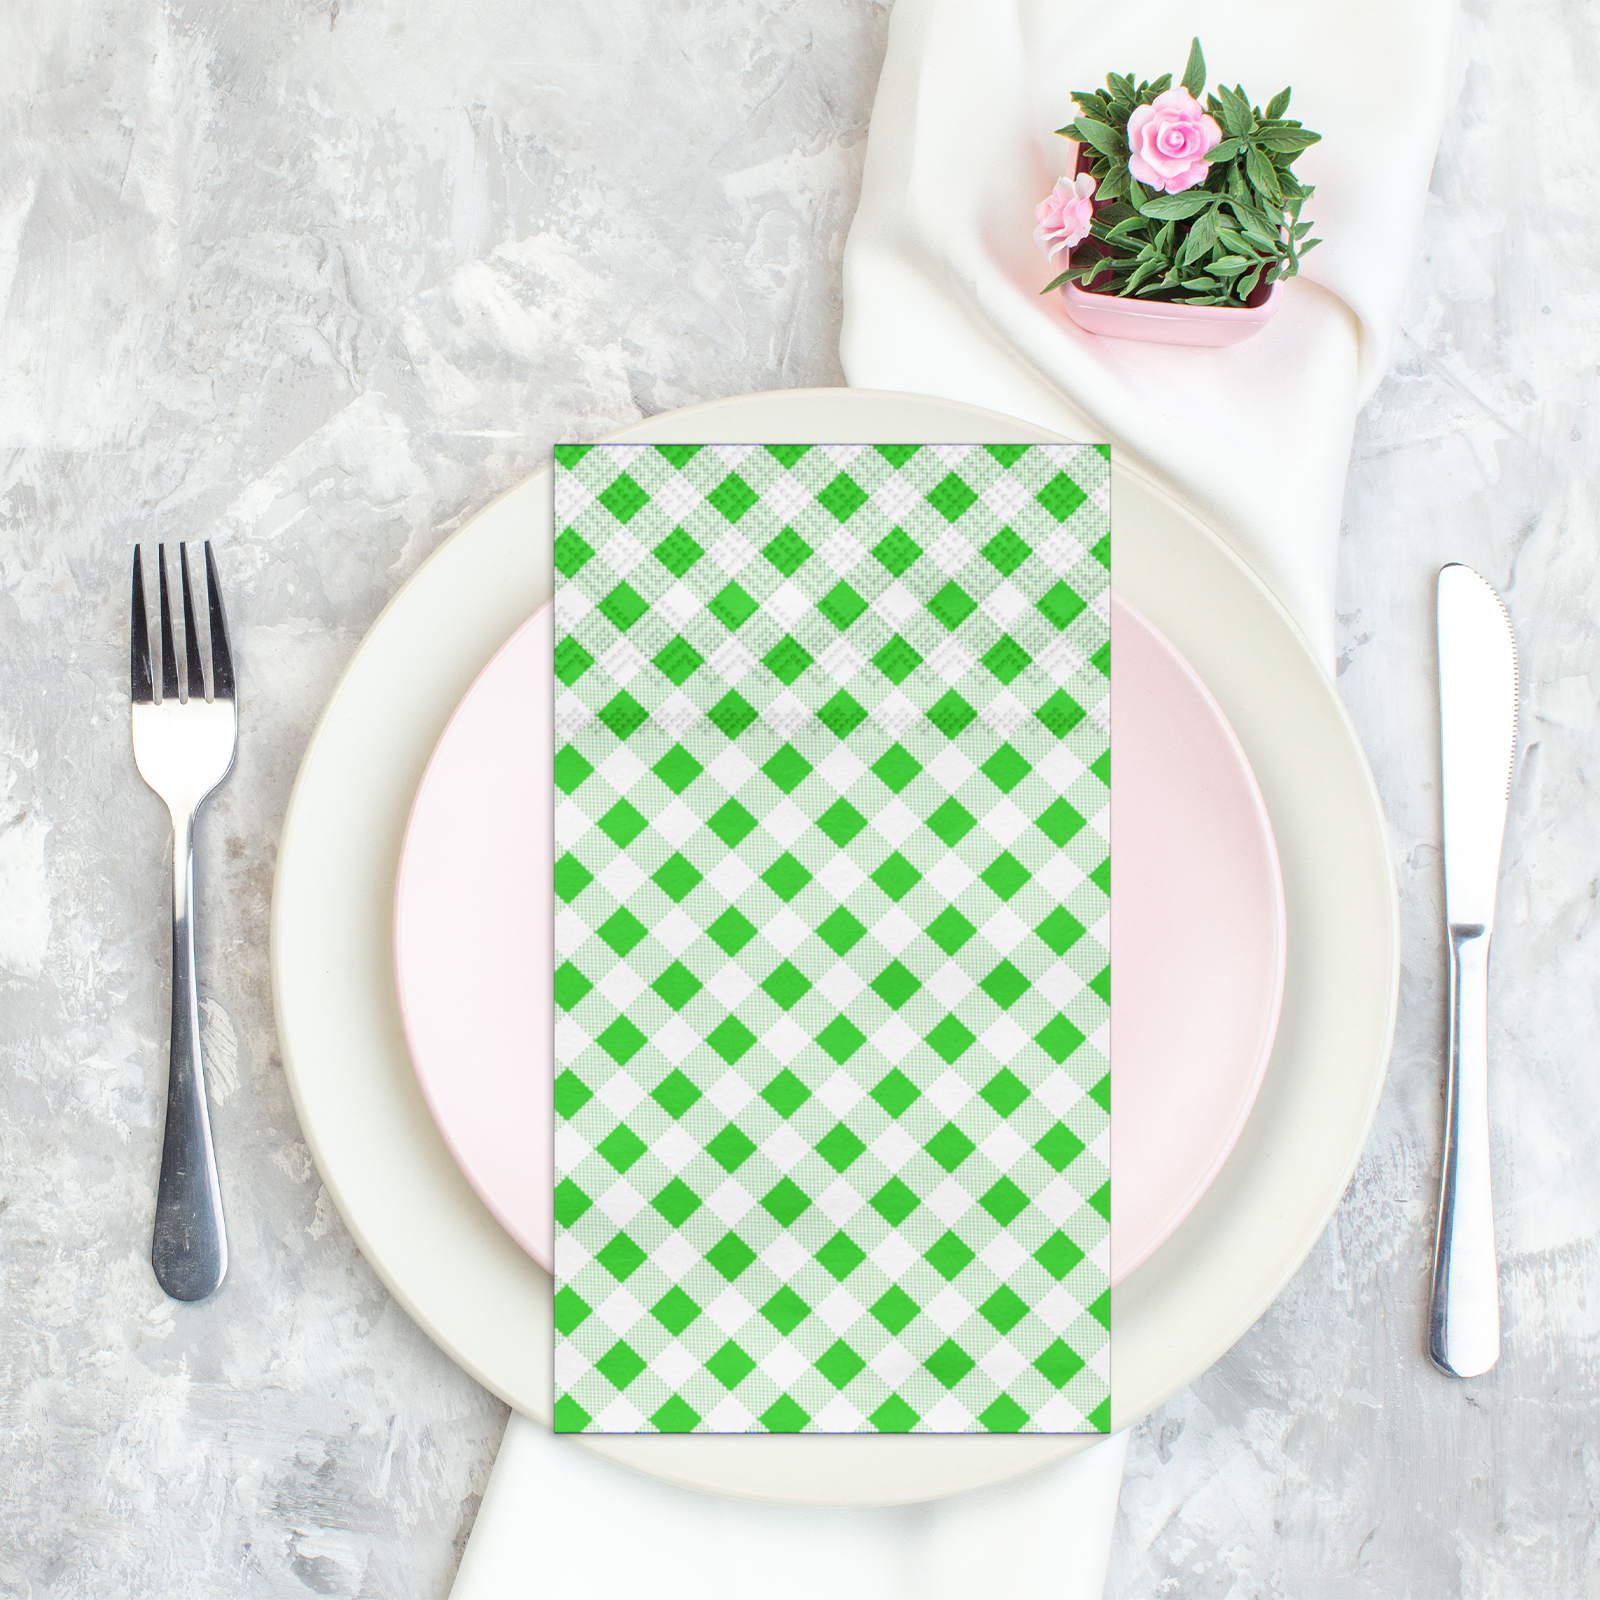 DYLIVeS 80 Count Guest Napkins Green Napkins Buffalo plaid Napkins Disposable Towels Gingham Napkins 3 Ply Disposable Paper Dinner Napkins Yellow and White Checkered Napkins - image 5 of 7